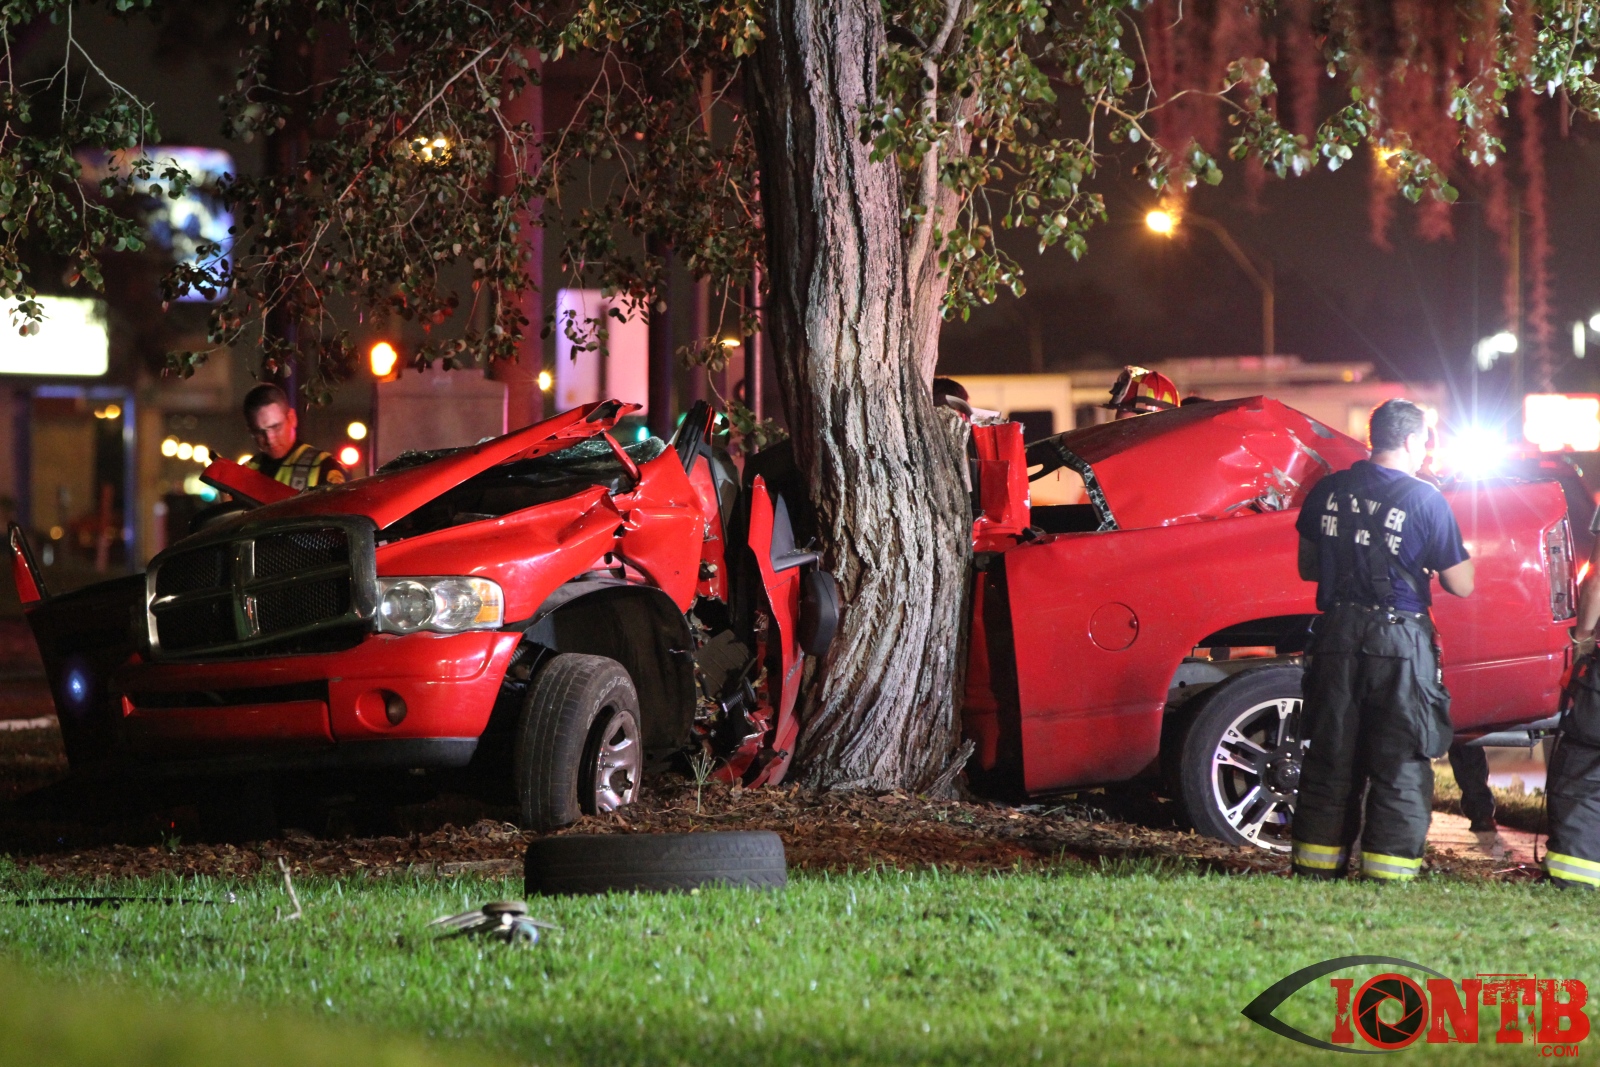 Two people injured when their truck collides with a tree in Clearwater